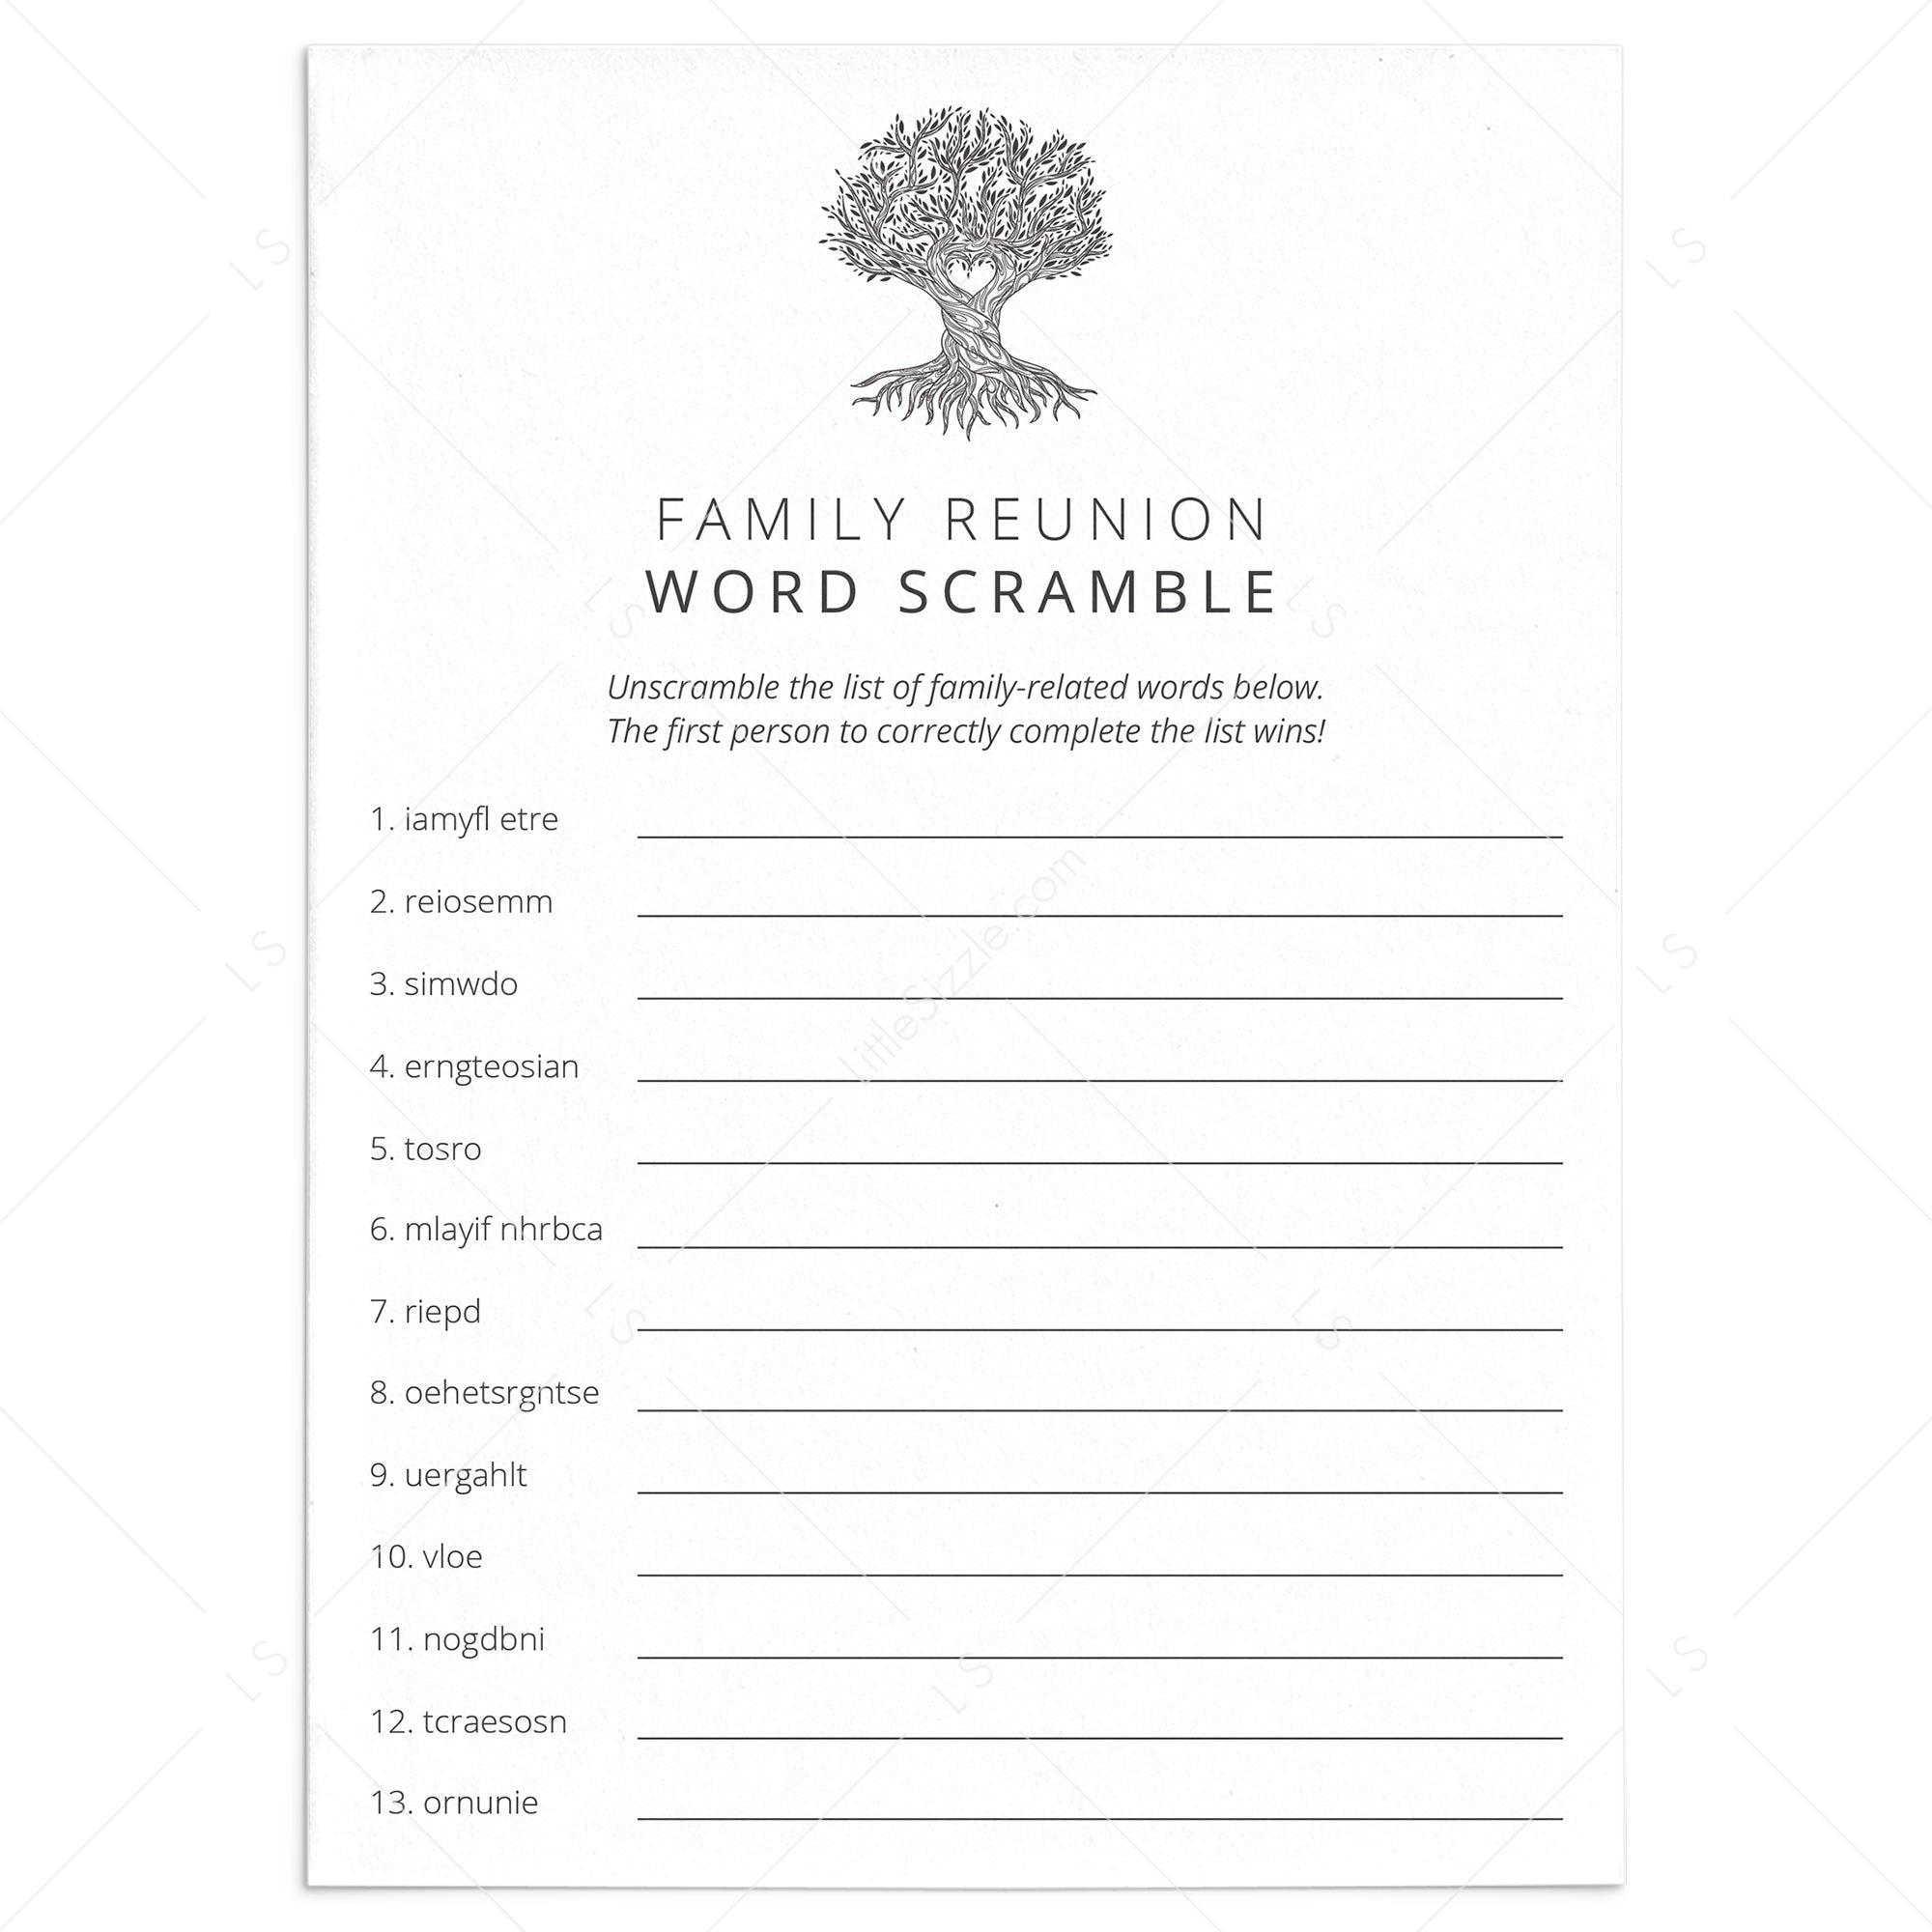 Family Reunion Word Scramble with Answers Printable by LittleSizzle